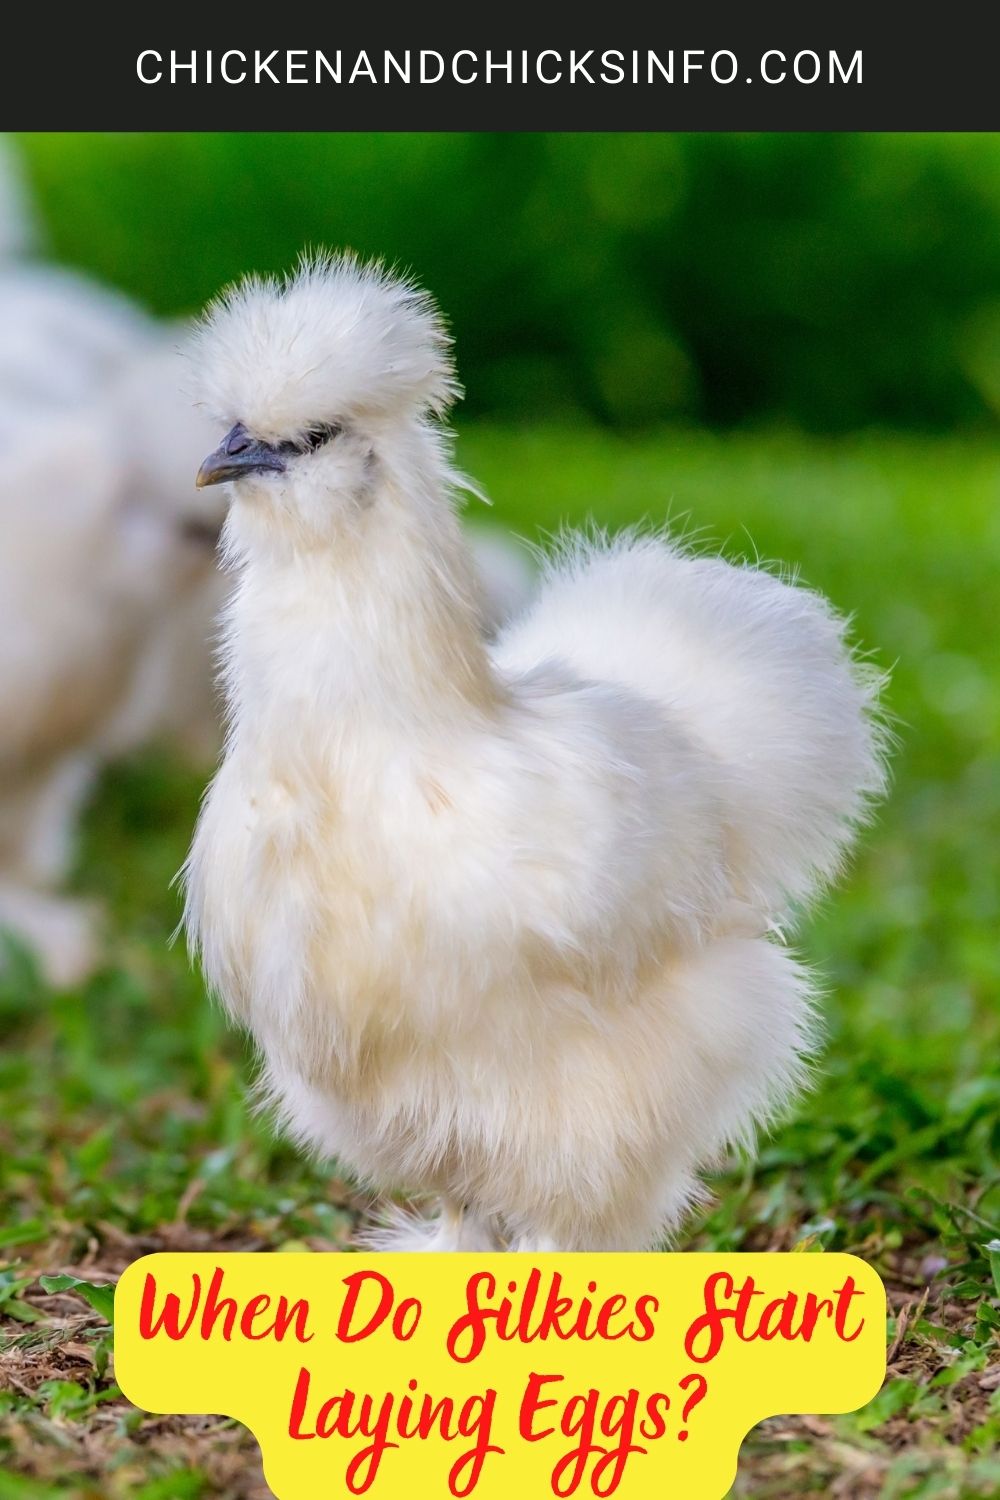 When Do Silkies Start Laying Eggs? poster.
